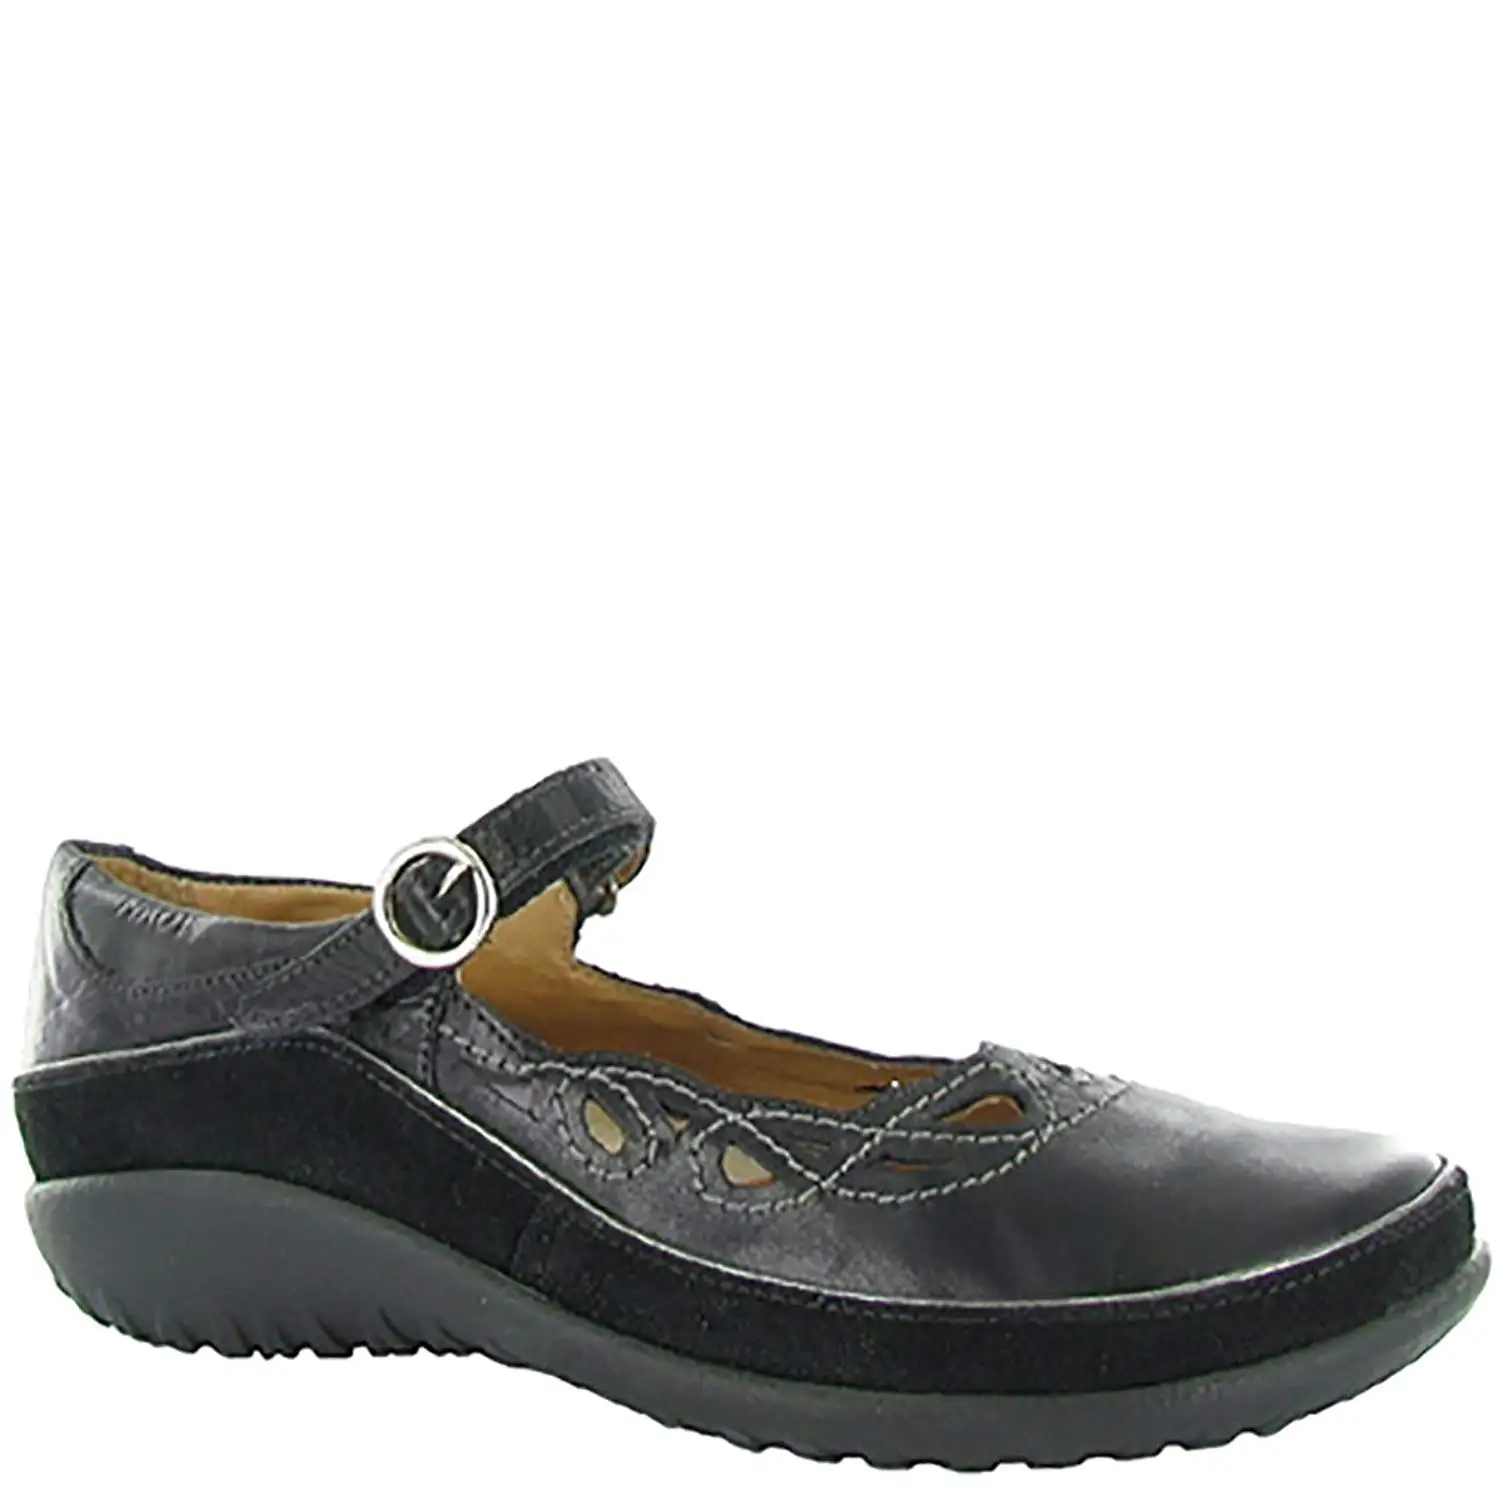 Cheap Naot Shoes Clearance, find Naot 